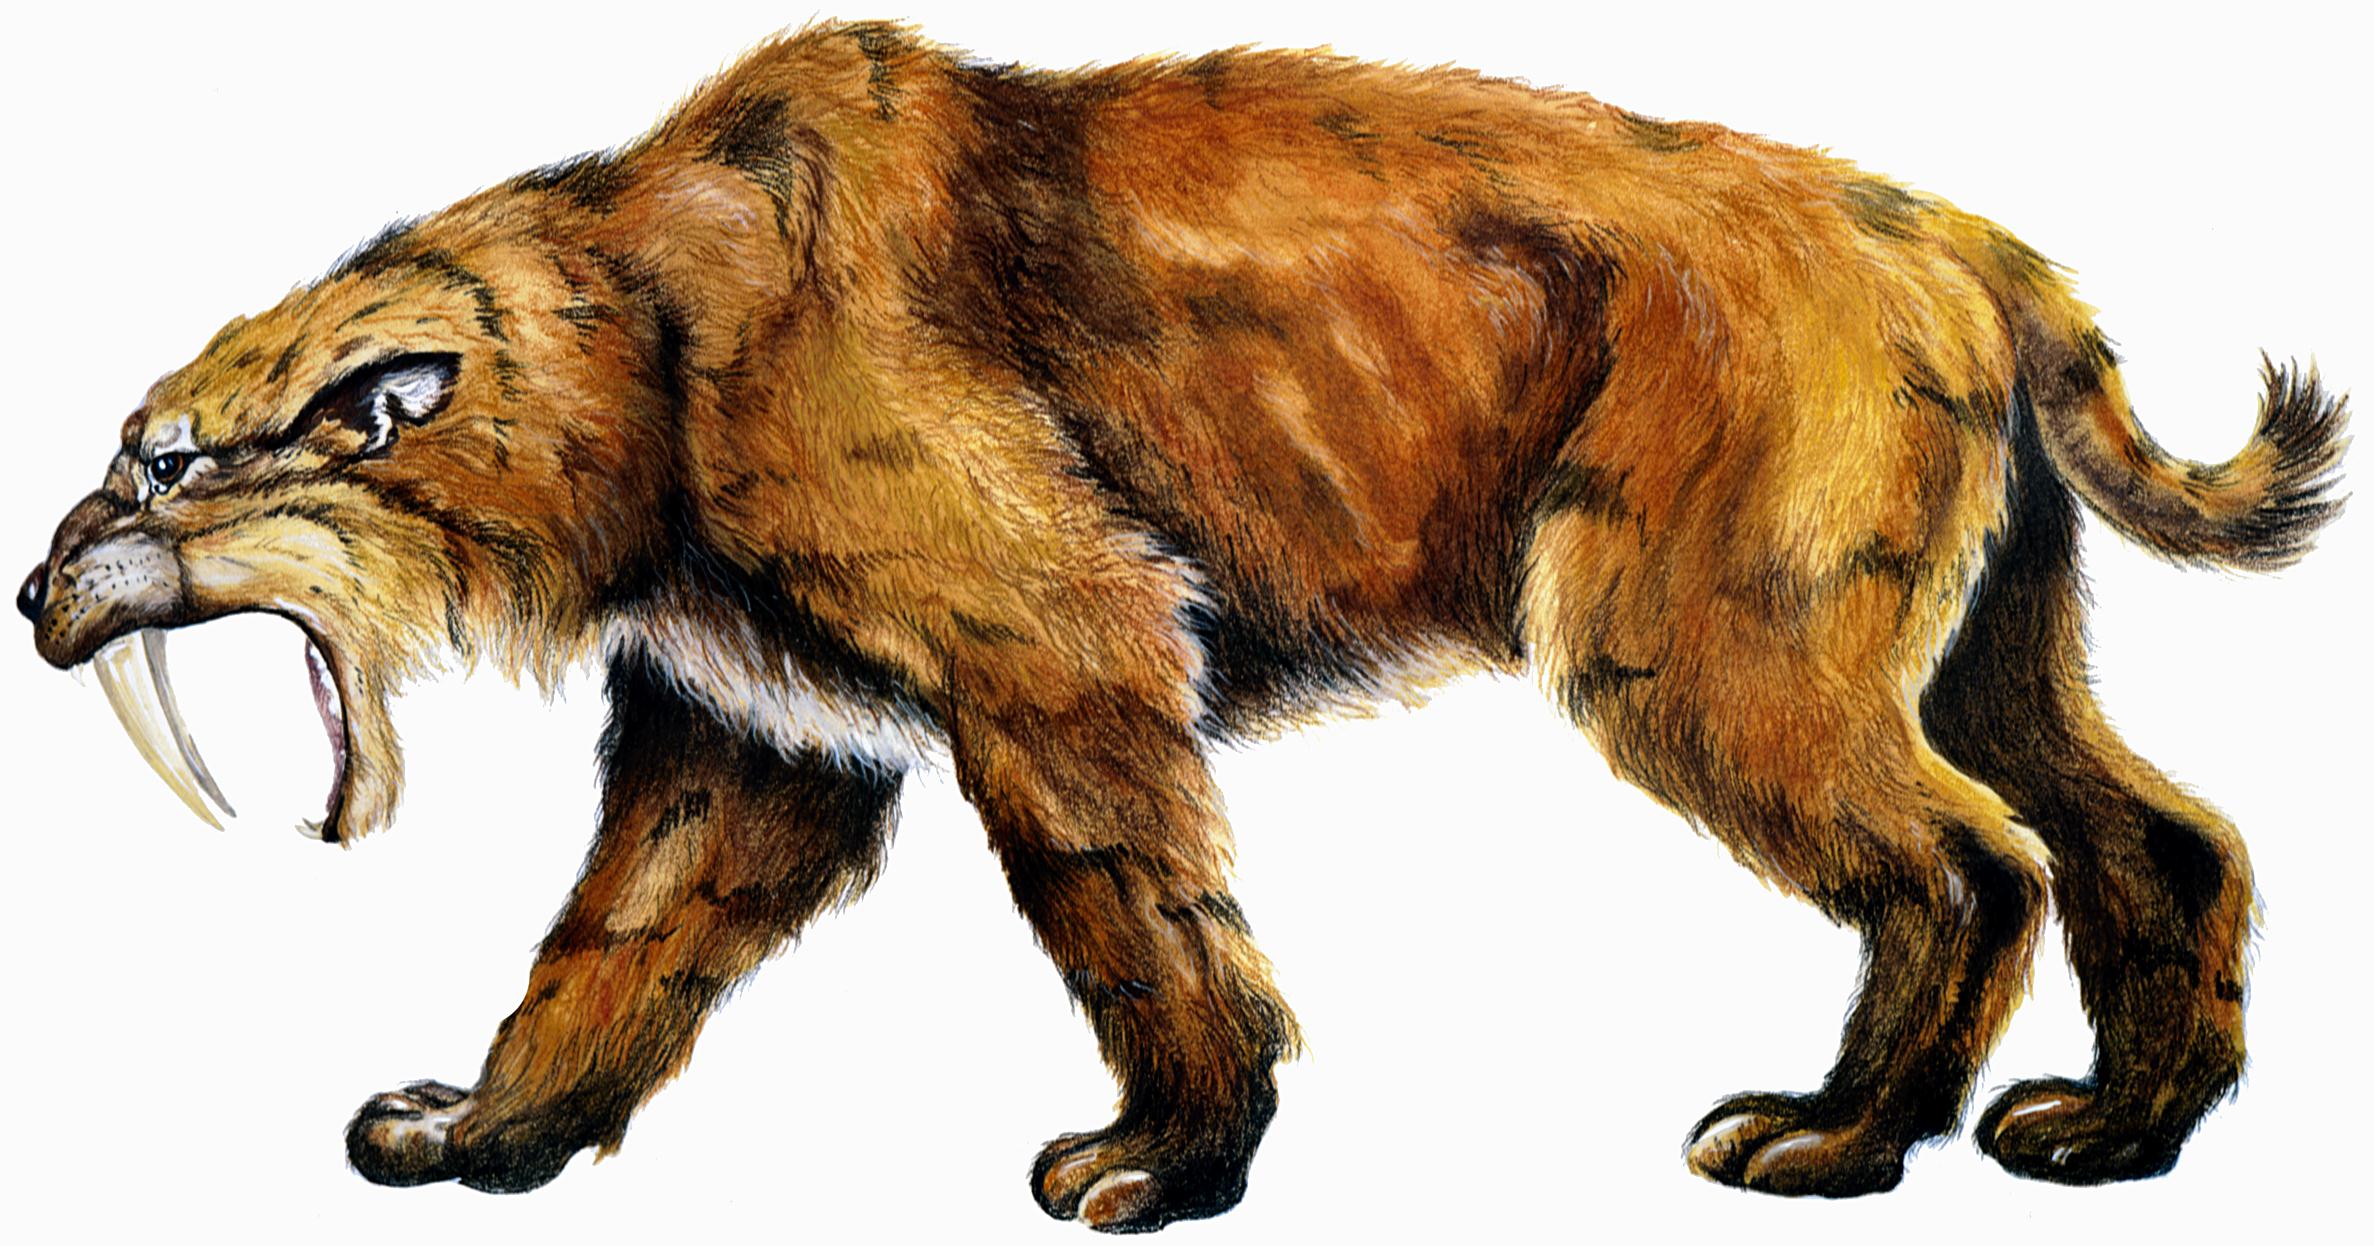 Saber-toothed cat (Smilodon fatalis). Image was generously provided by the Indiana State Museum.